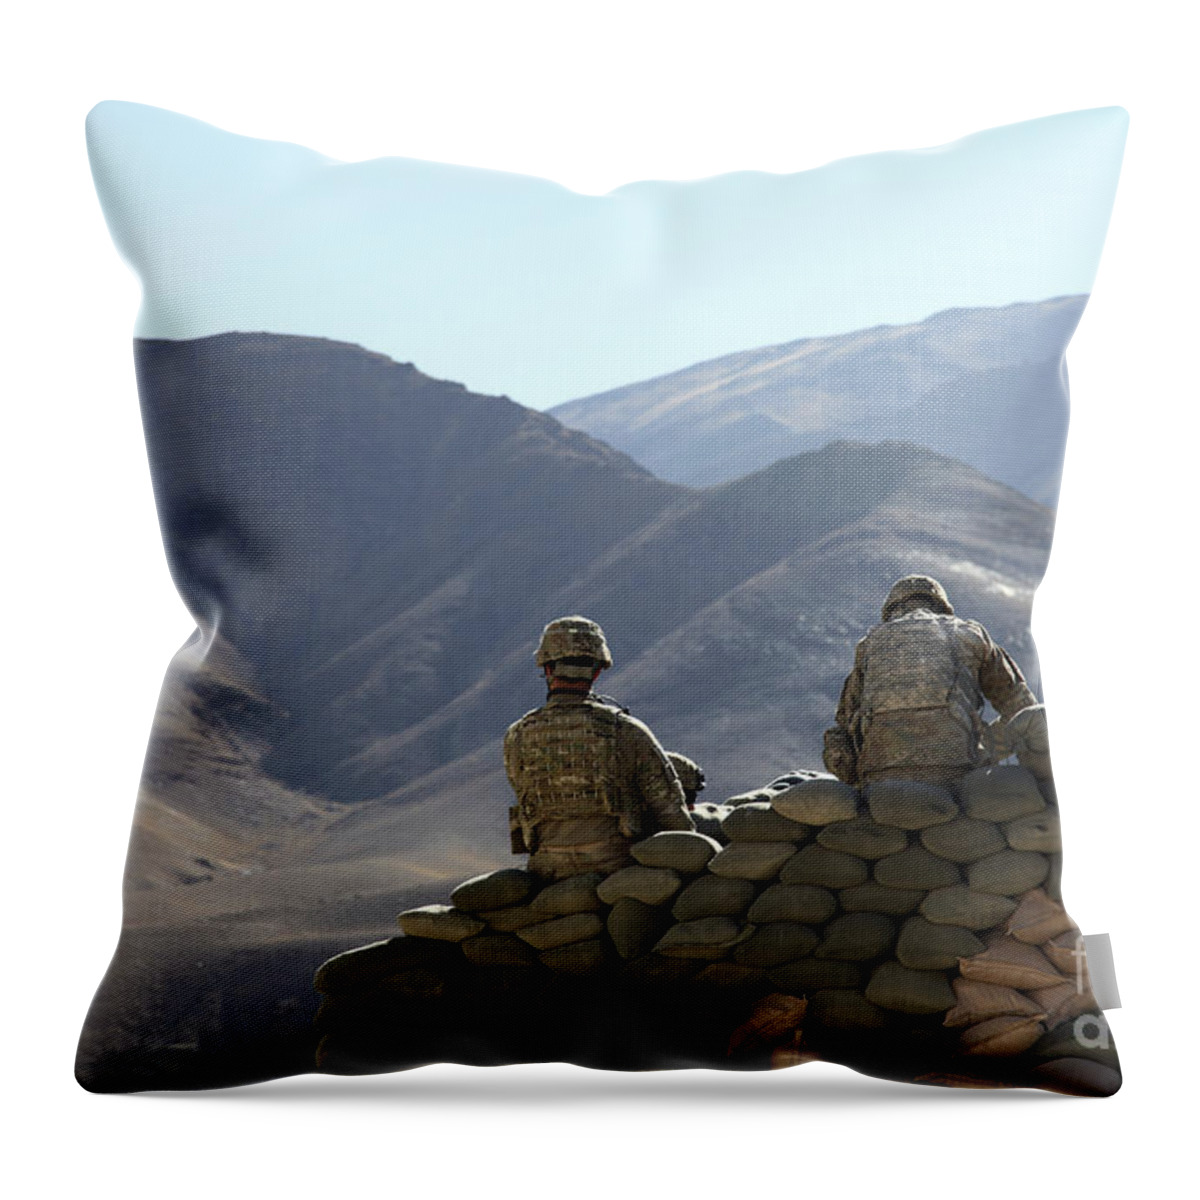 Afghanistan Throw Pillow featuring the photograph U.s. Army Soldiers Run Communications by Stocktrek Images